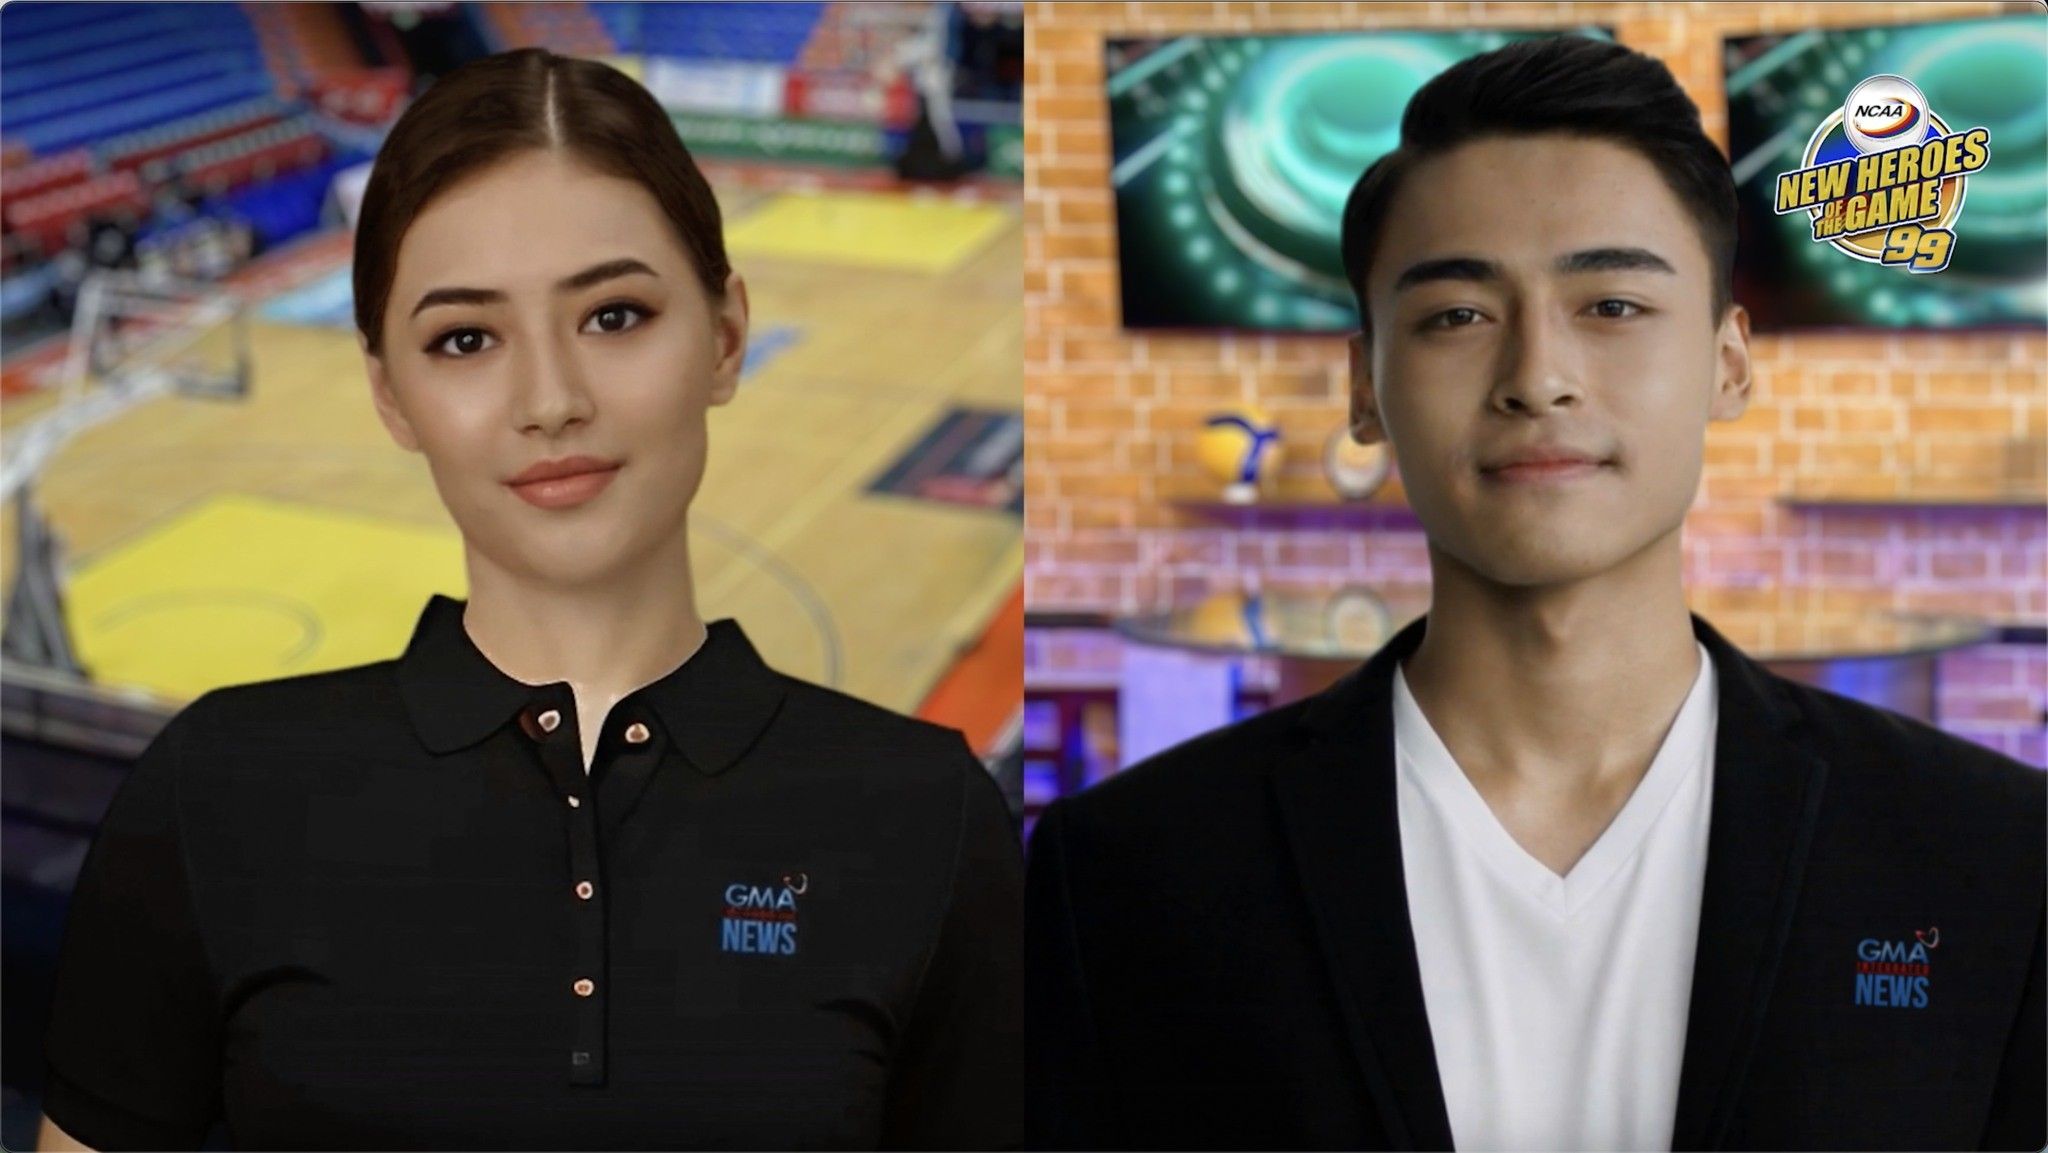 'Players arenâ��t automated, so why?': Filipino sportscasters cry foul as AI presenters debut on local sports TV